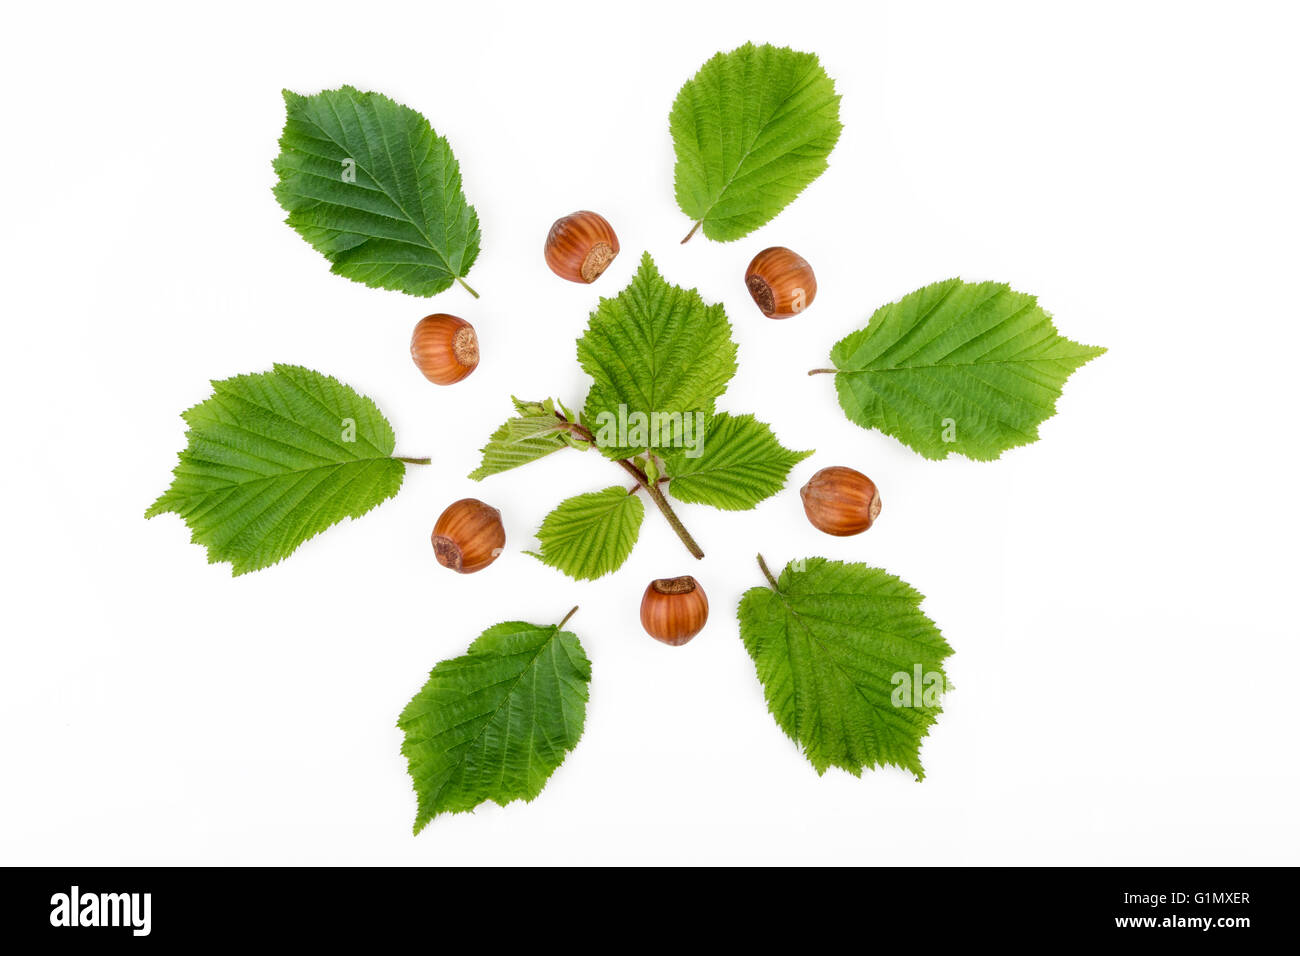 Hazelnuts with leaves isolated on white background. Top view. Stock Photo